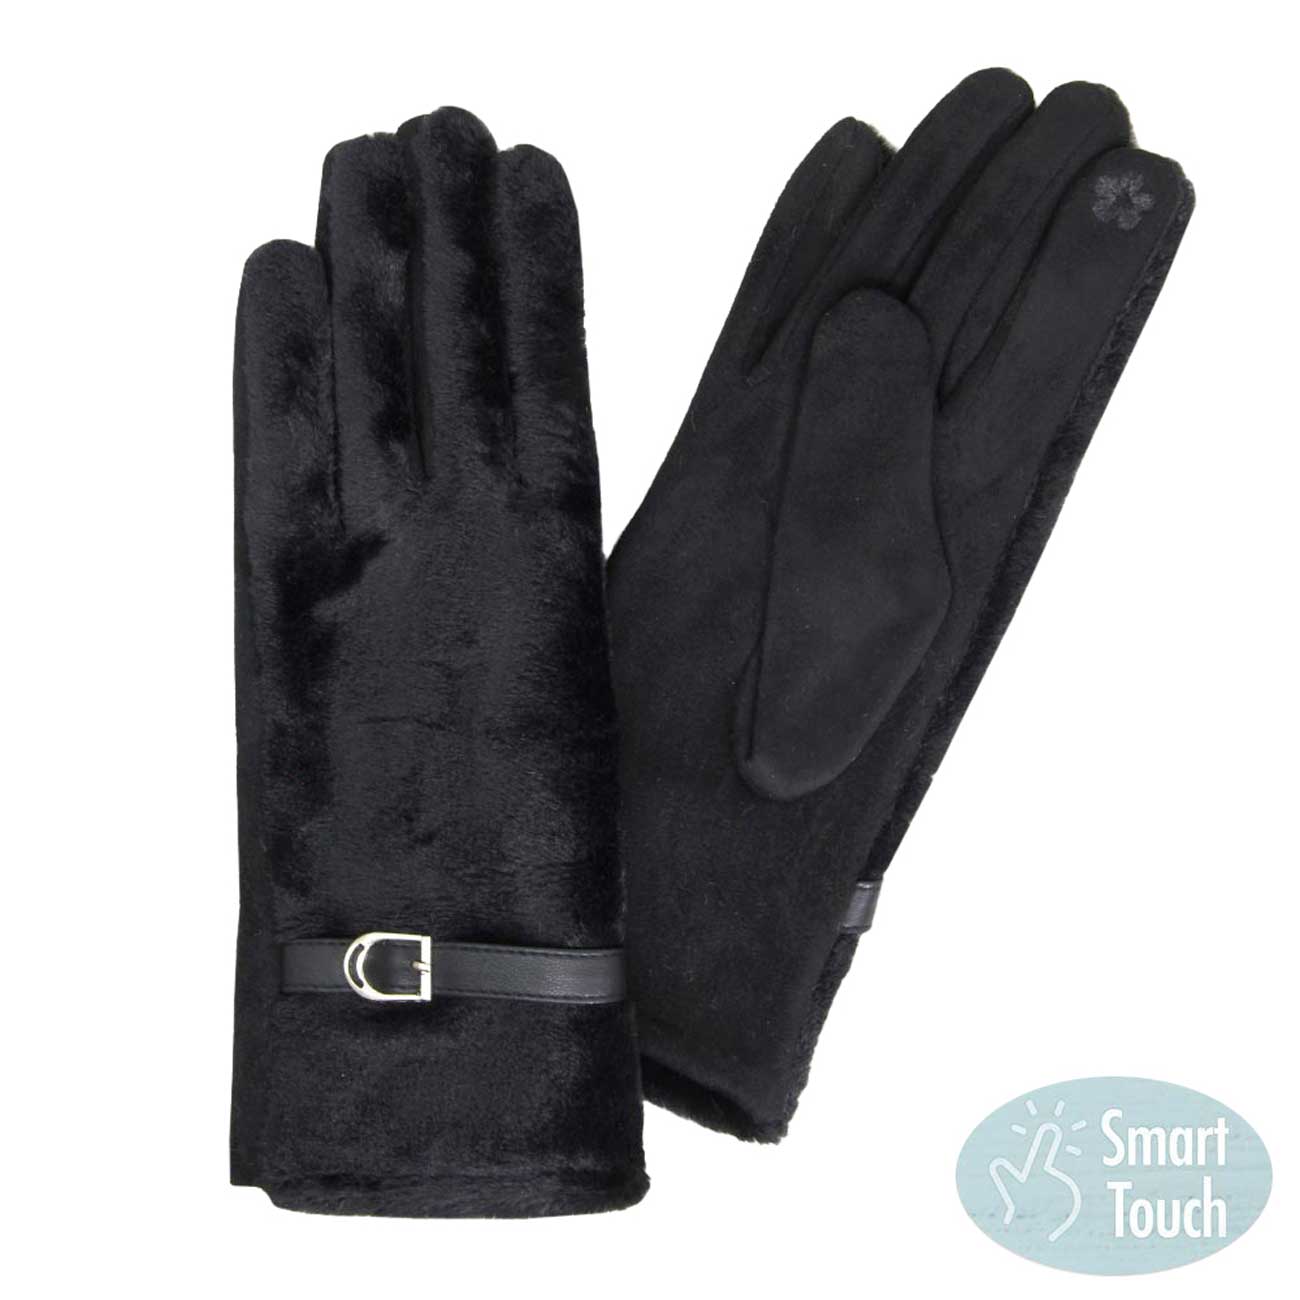 Navy Solid Faux Fur Touch Gloves, accent your look much more eye-catching and give your warmth and coziness. It's very fashionable, attractive, and cute looking in the winter season and cold days. You will love these Faux Fur gloves in soft neutral colors that will amp up your outlook to a greater extent. An awesome pair of gloves that fits with any outfit in style. It's the autumnal touch you need to finish your outfit with perfection. The perfect winter gift accessory!